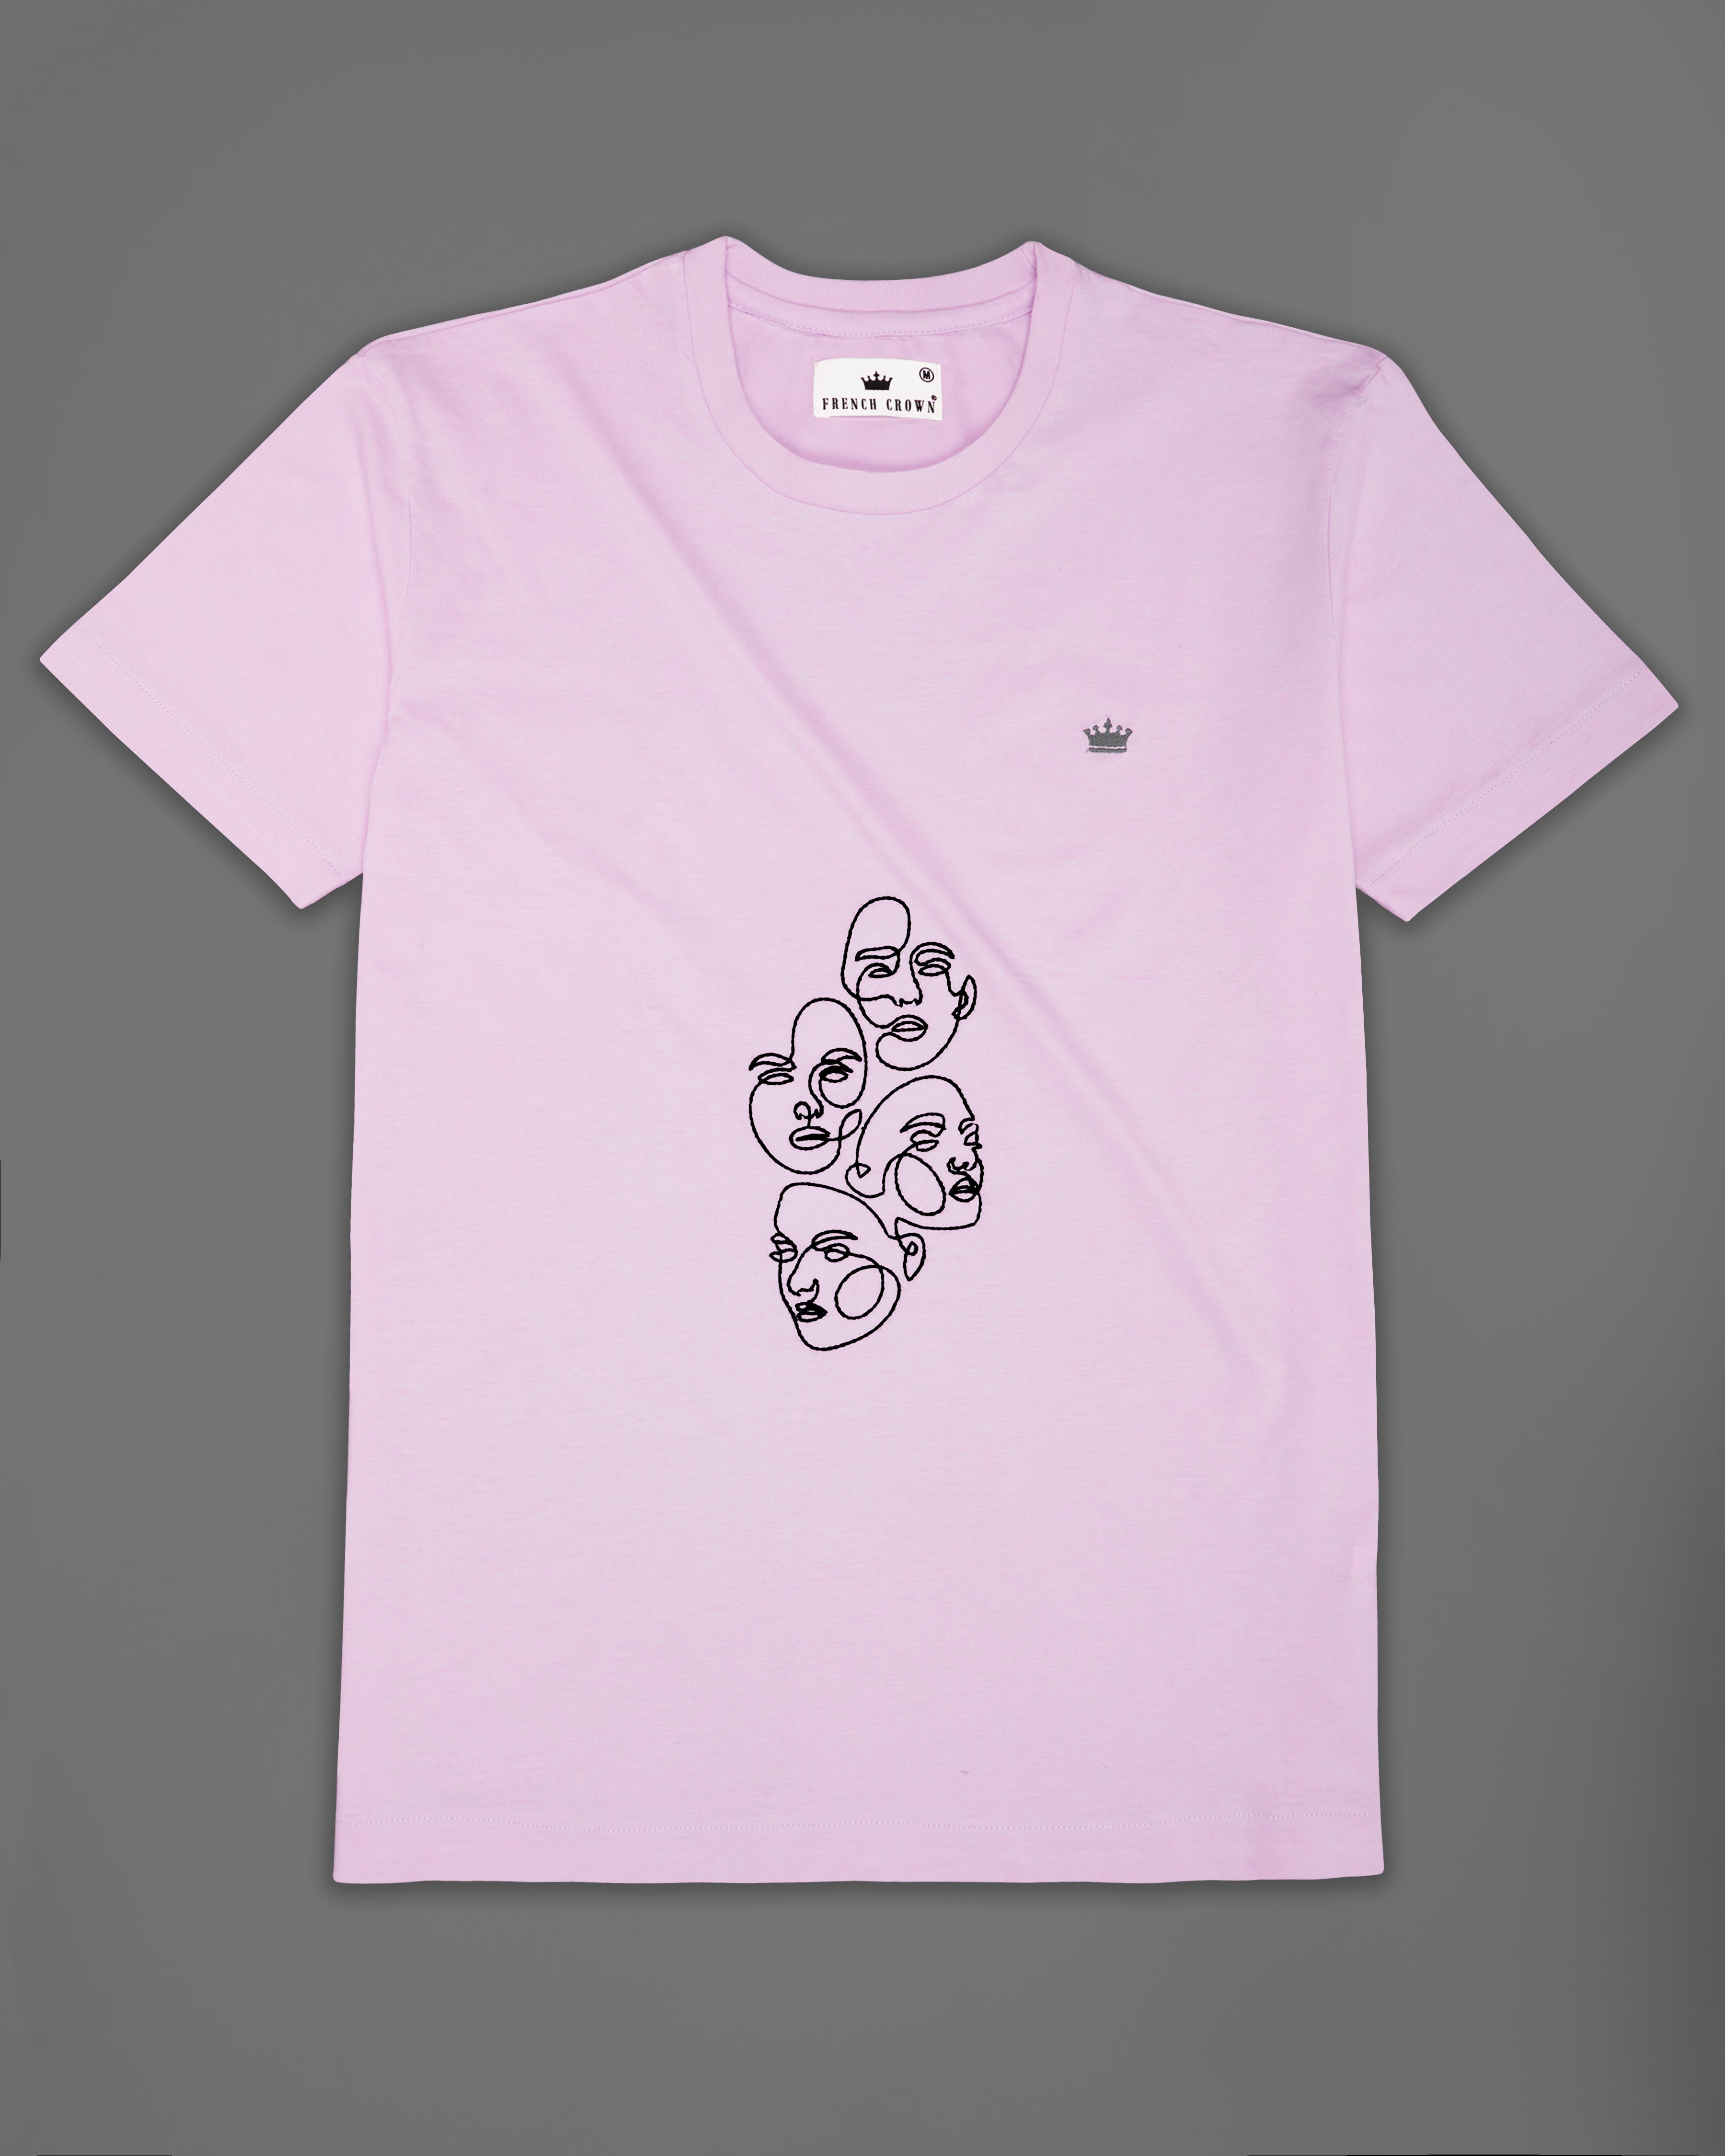 Carousel Light Purple with Face Embroidered Work Organic Cotton T-shirt TS017-W01-S, TS017-W01-M, TS017-W01-L, TS017-W01-XL, TS017-W01-XXL